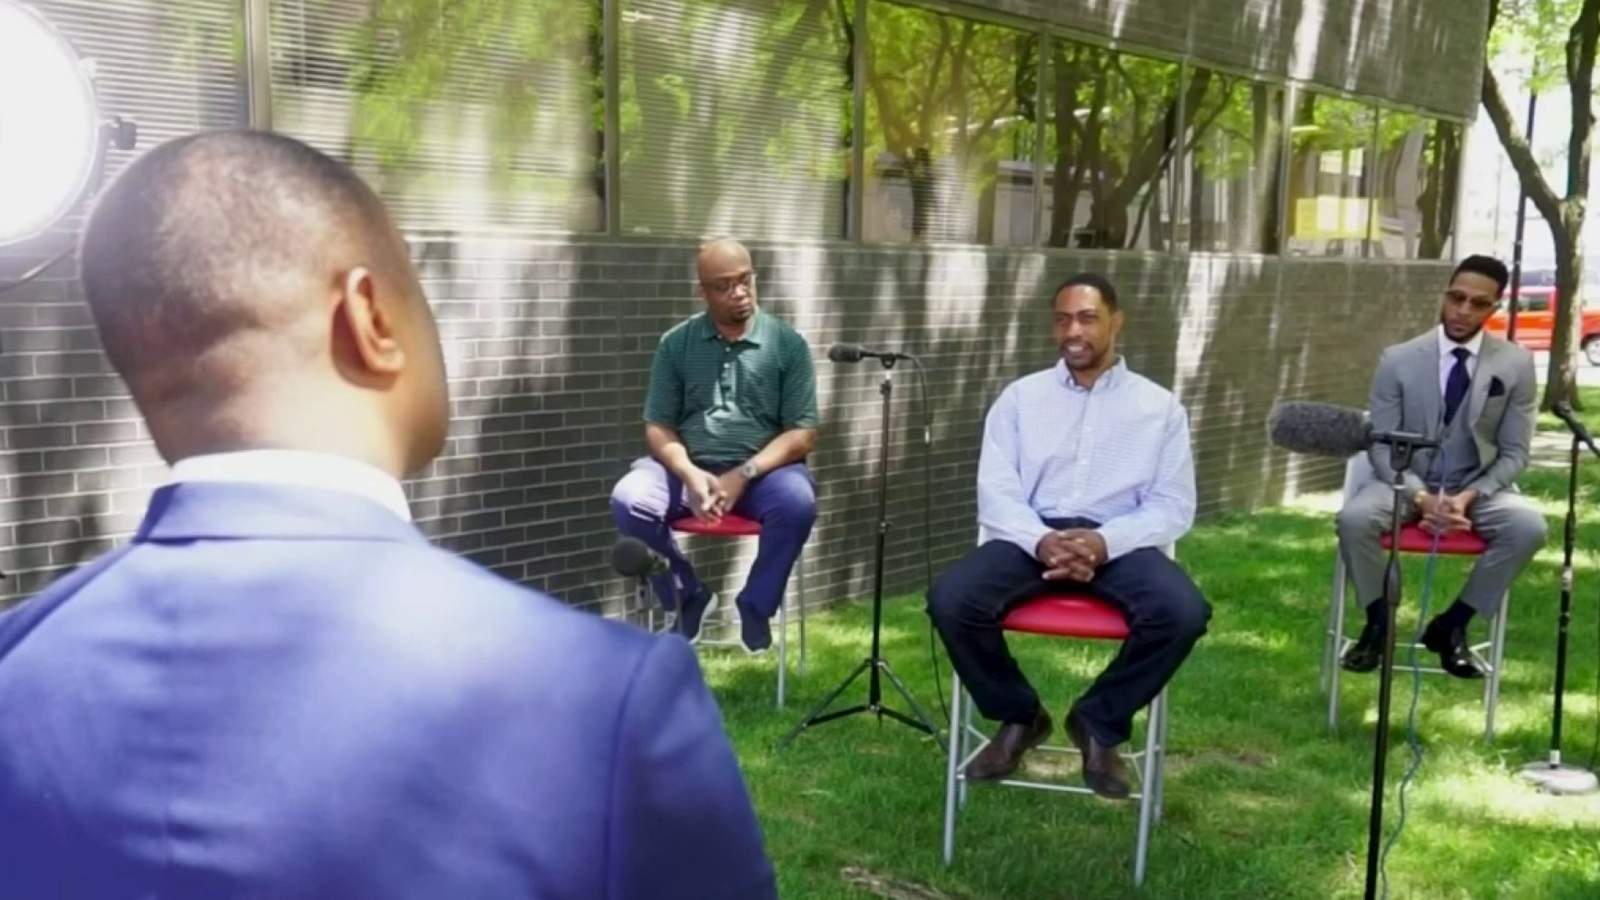 WATCH: Black fathers speak candidly about talking to sons about racism in America